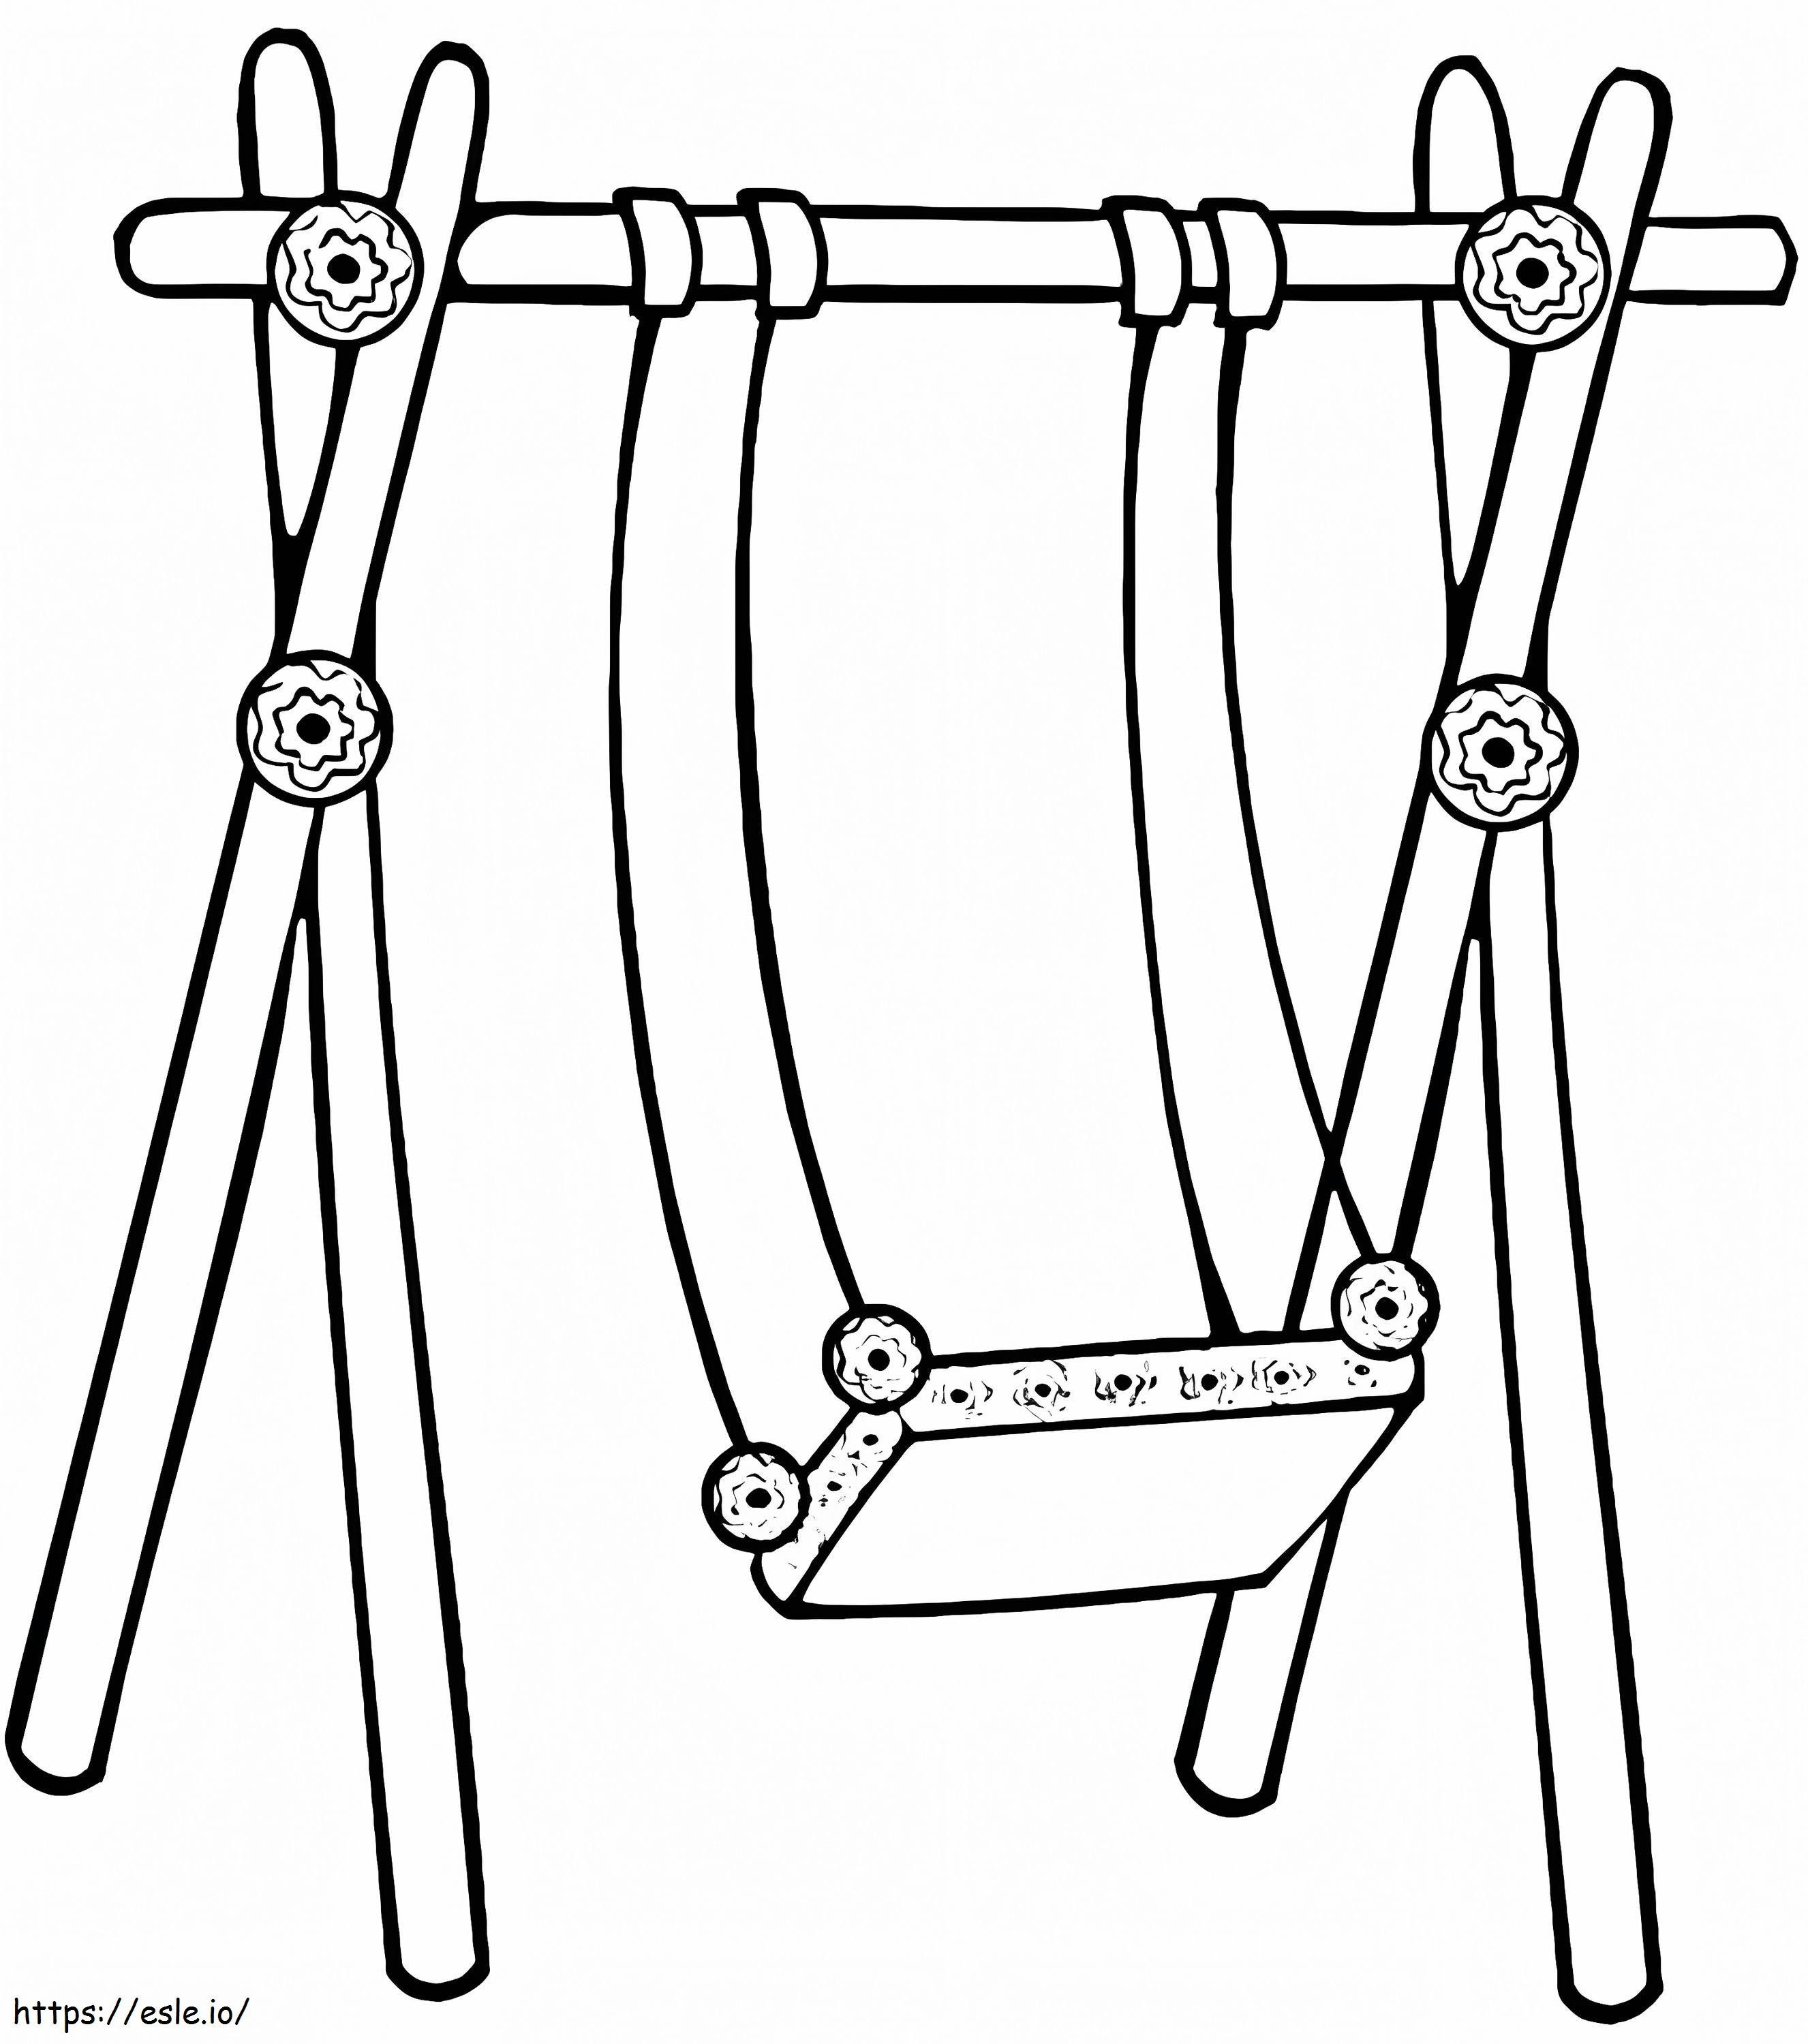 Print Swing coloring page